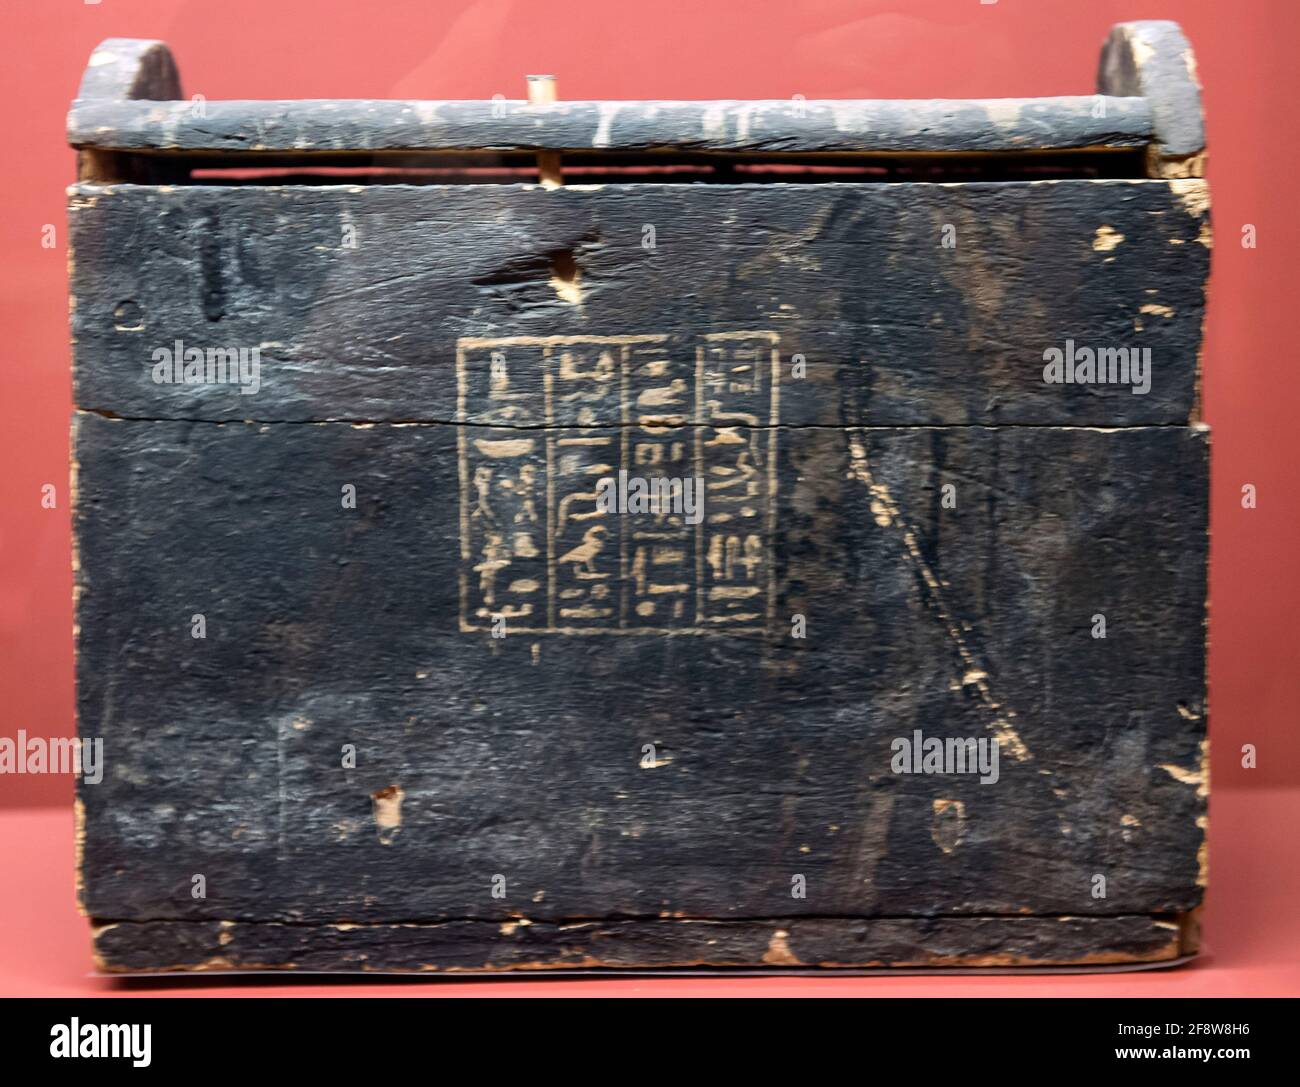 San Jose, California, USA. 14th Apr, 2021. Ushabti Storage Box of a Chantress is seen on display at the Rosicrucian Egyptian Museum. Established in 1928 as The Rosicrucian Egyptian Oriental Museum, the Museum - owned by the Rosicrucian Order, a philosophical and educational 501c3 public benefit organization - now houses more than 4,000 artifacts. It is the largest display of Egyptian artifacts in western North America. Credit: Brian Cahn/ZUMA Wire/Alamy Live News Stock Photo